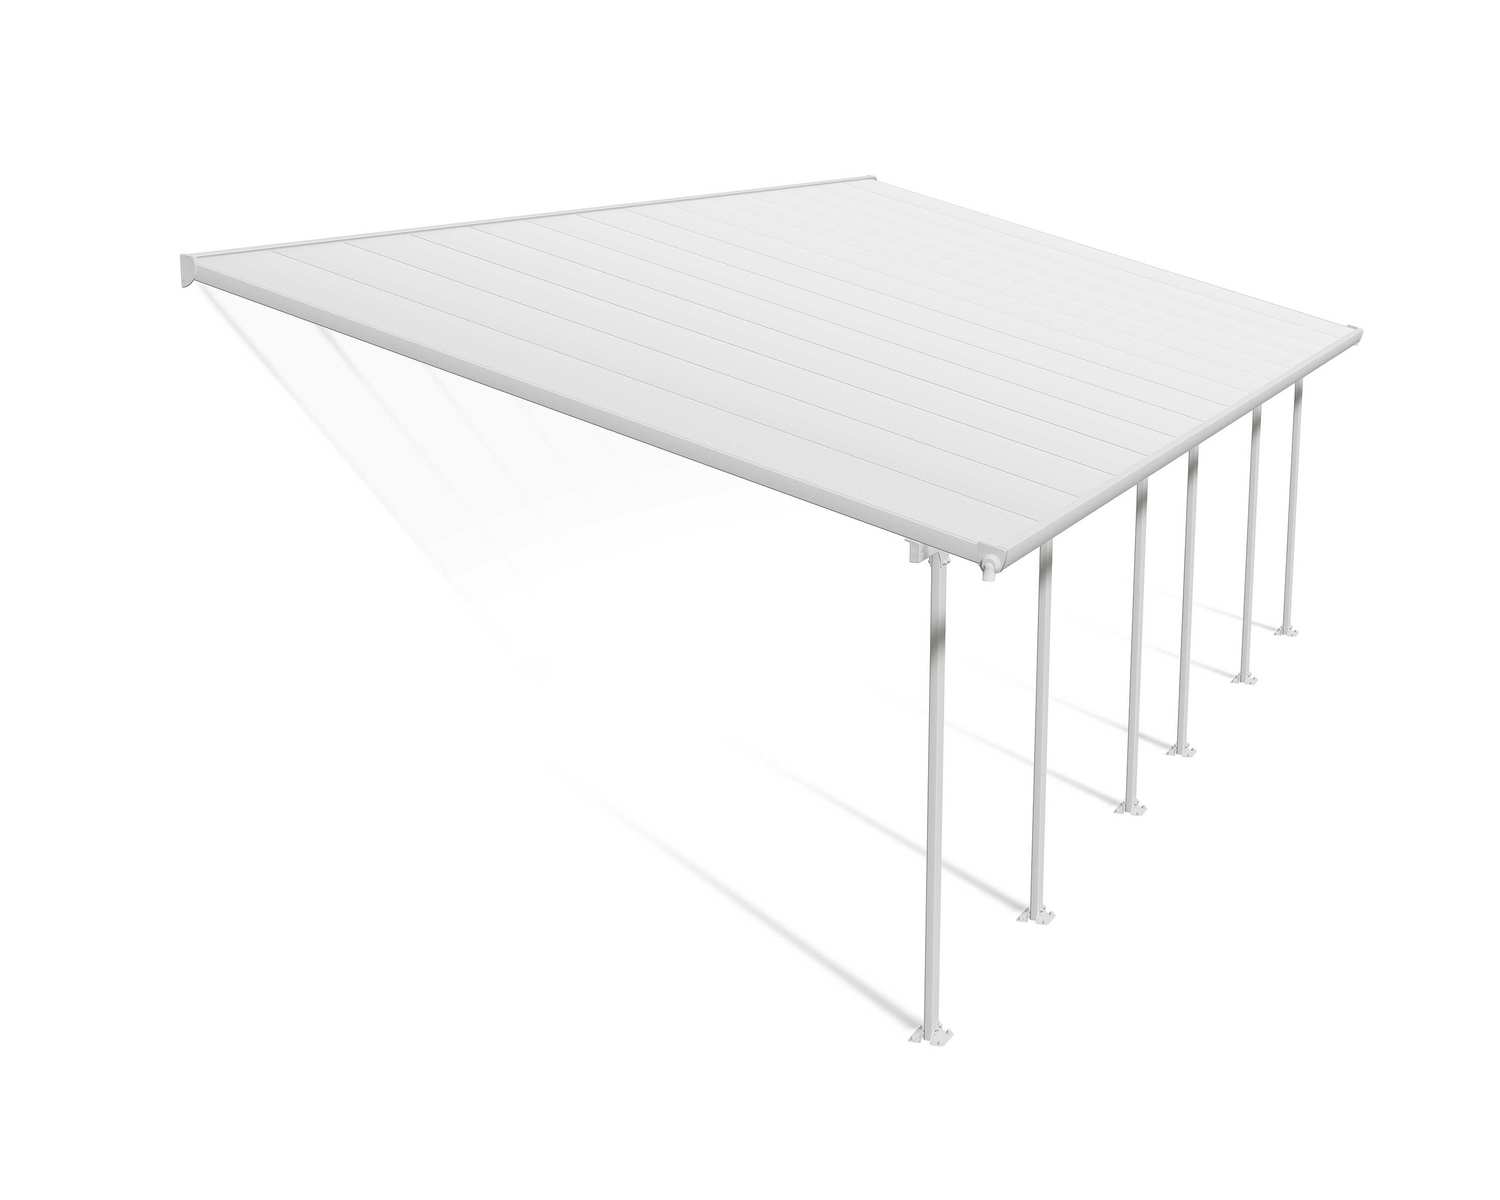 Patio Cover Kit Feria 4 ft. x 8.50 ft. White Structure & White Multi Wall Glazing